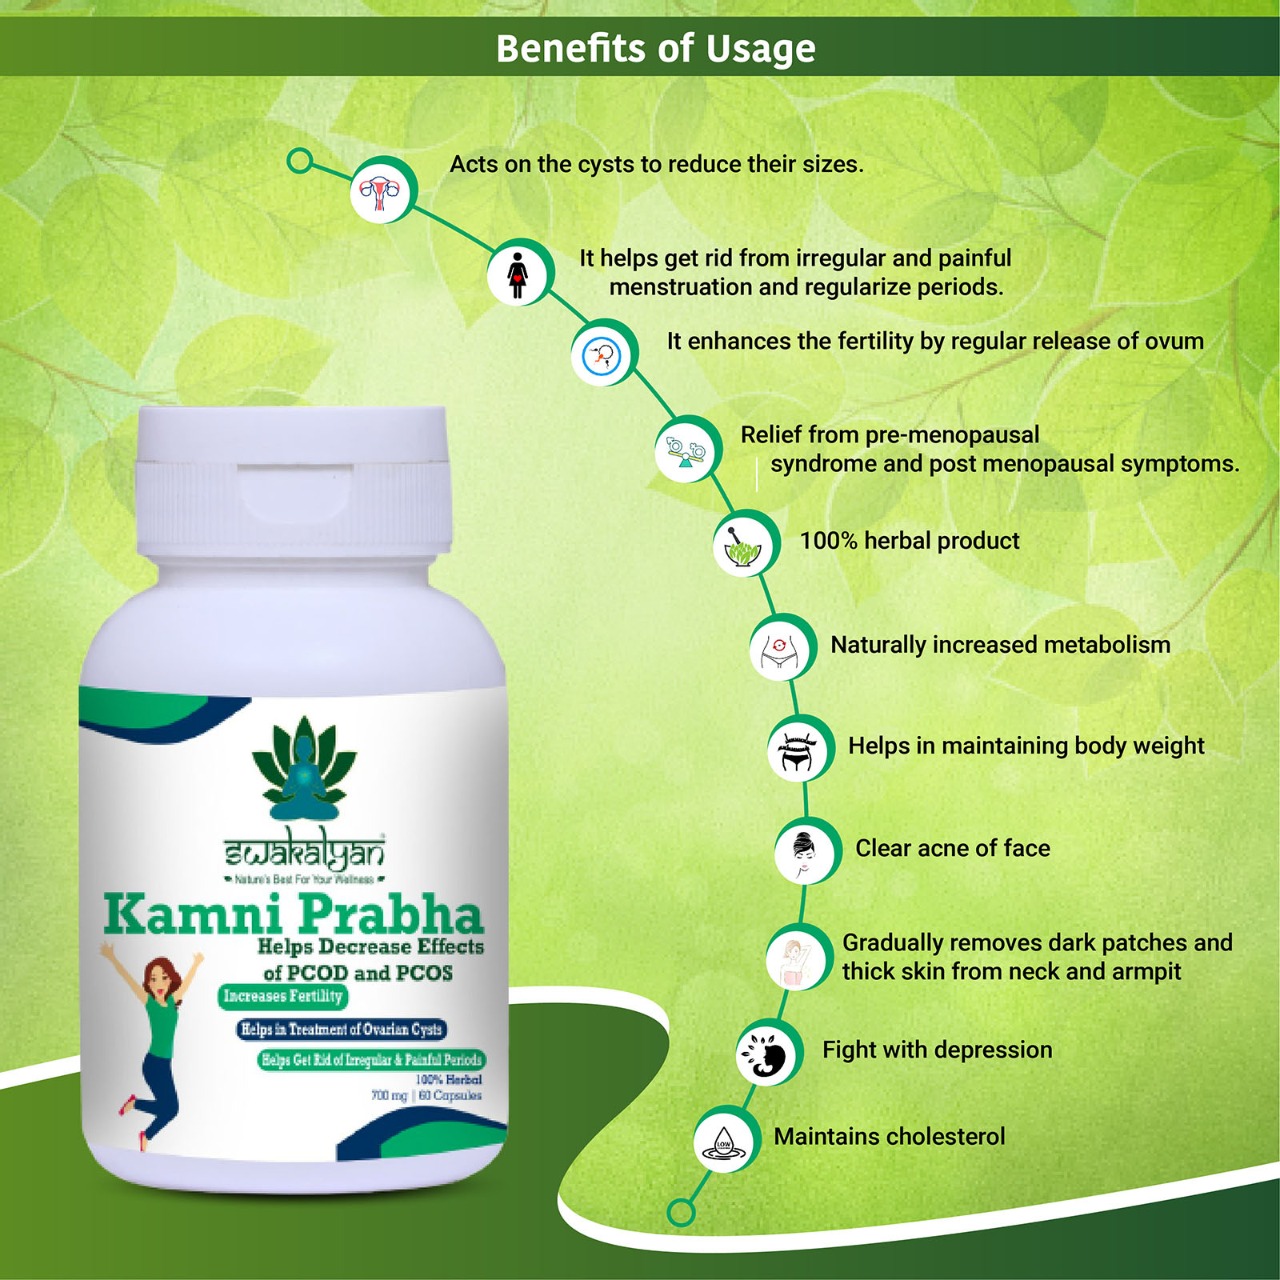  Swakalyan Kamni Prabha -Helps To Decrease Effects Of PCOD And PCOS